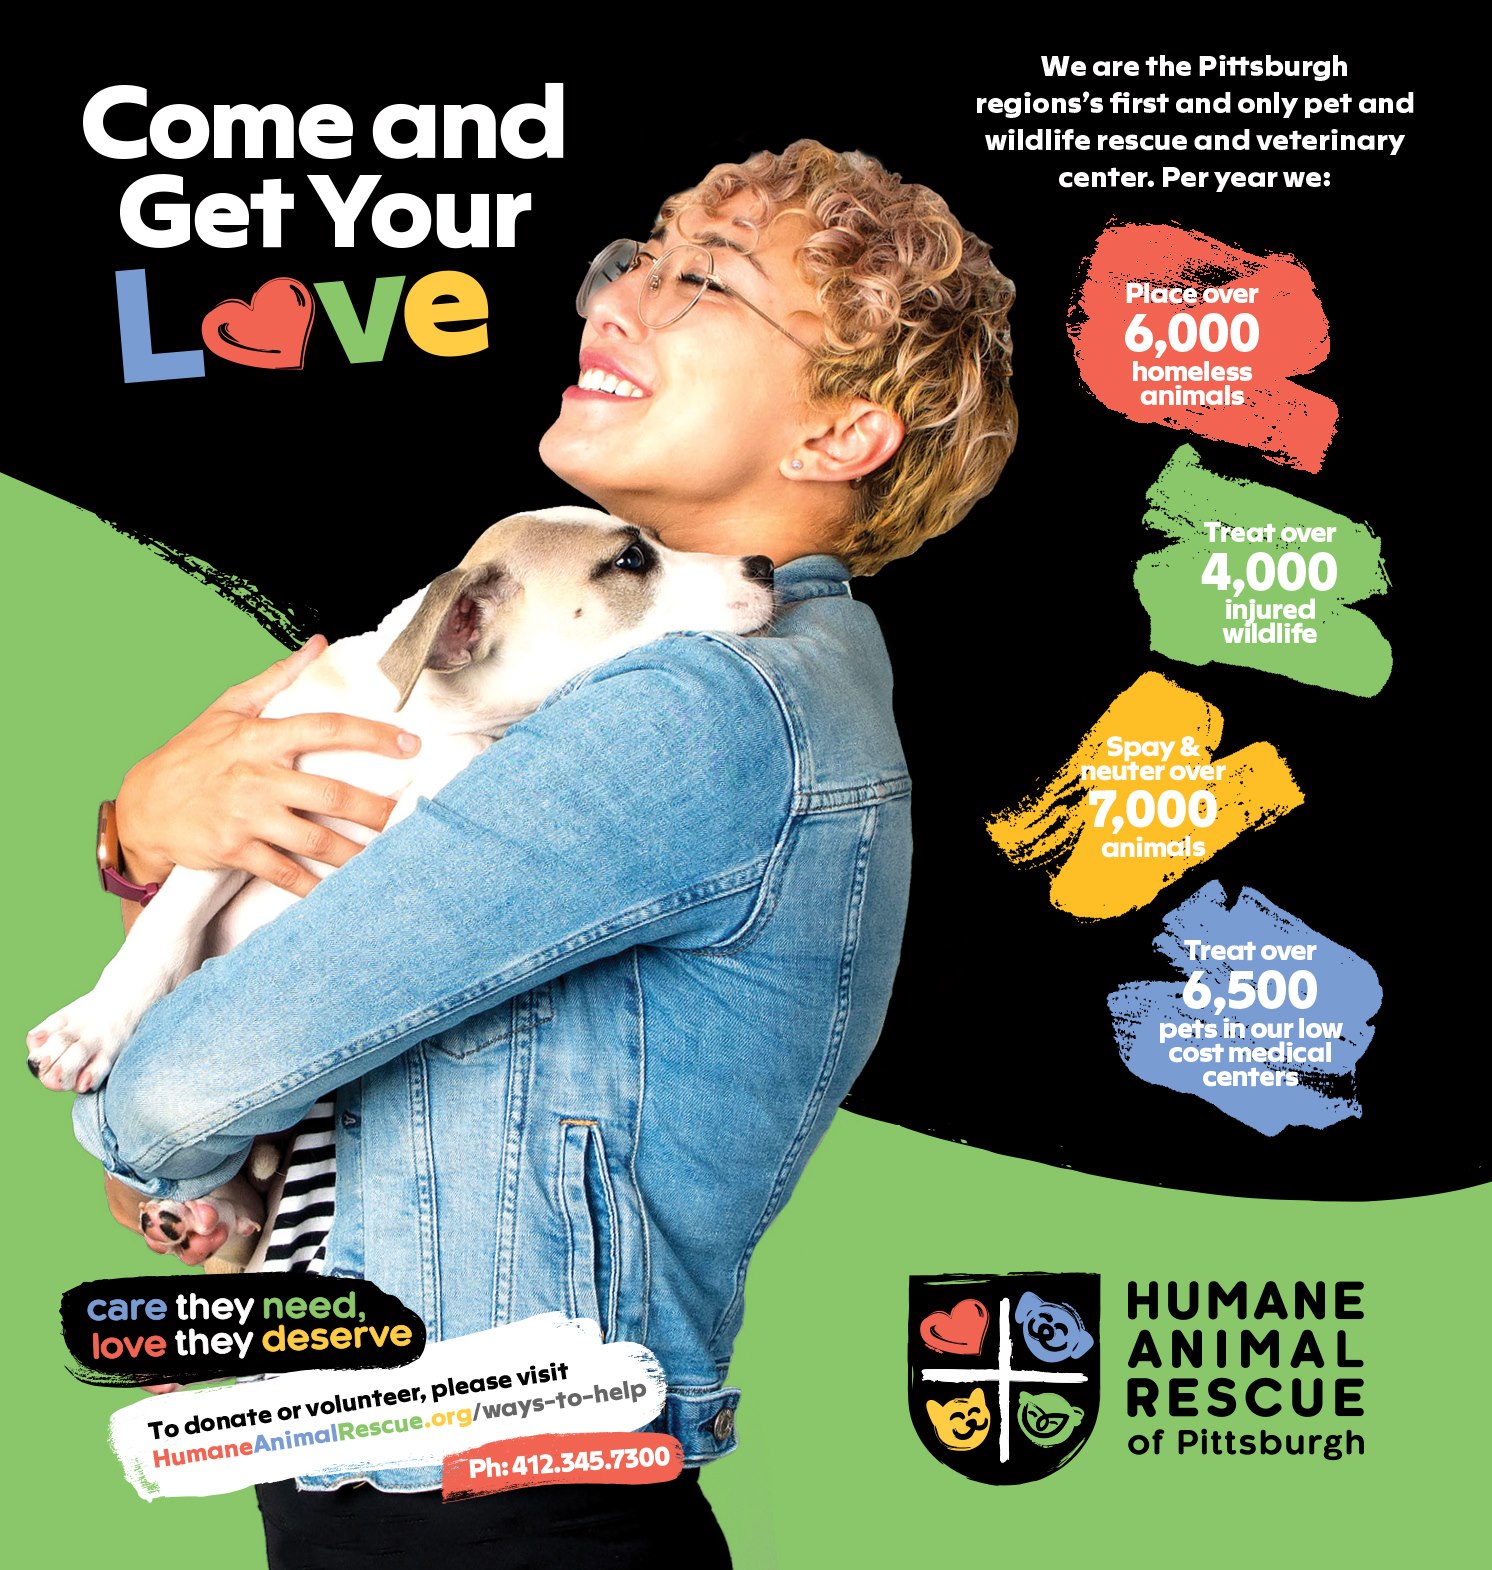 Humane Animal Rescue of Pittsburgh announces exciting new rebrand - Humane Animal  Rescue